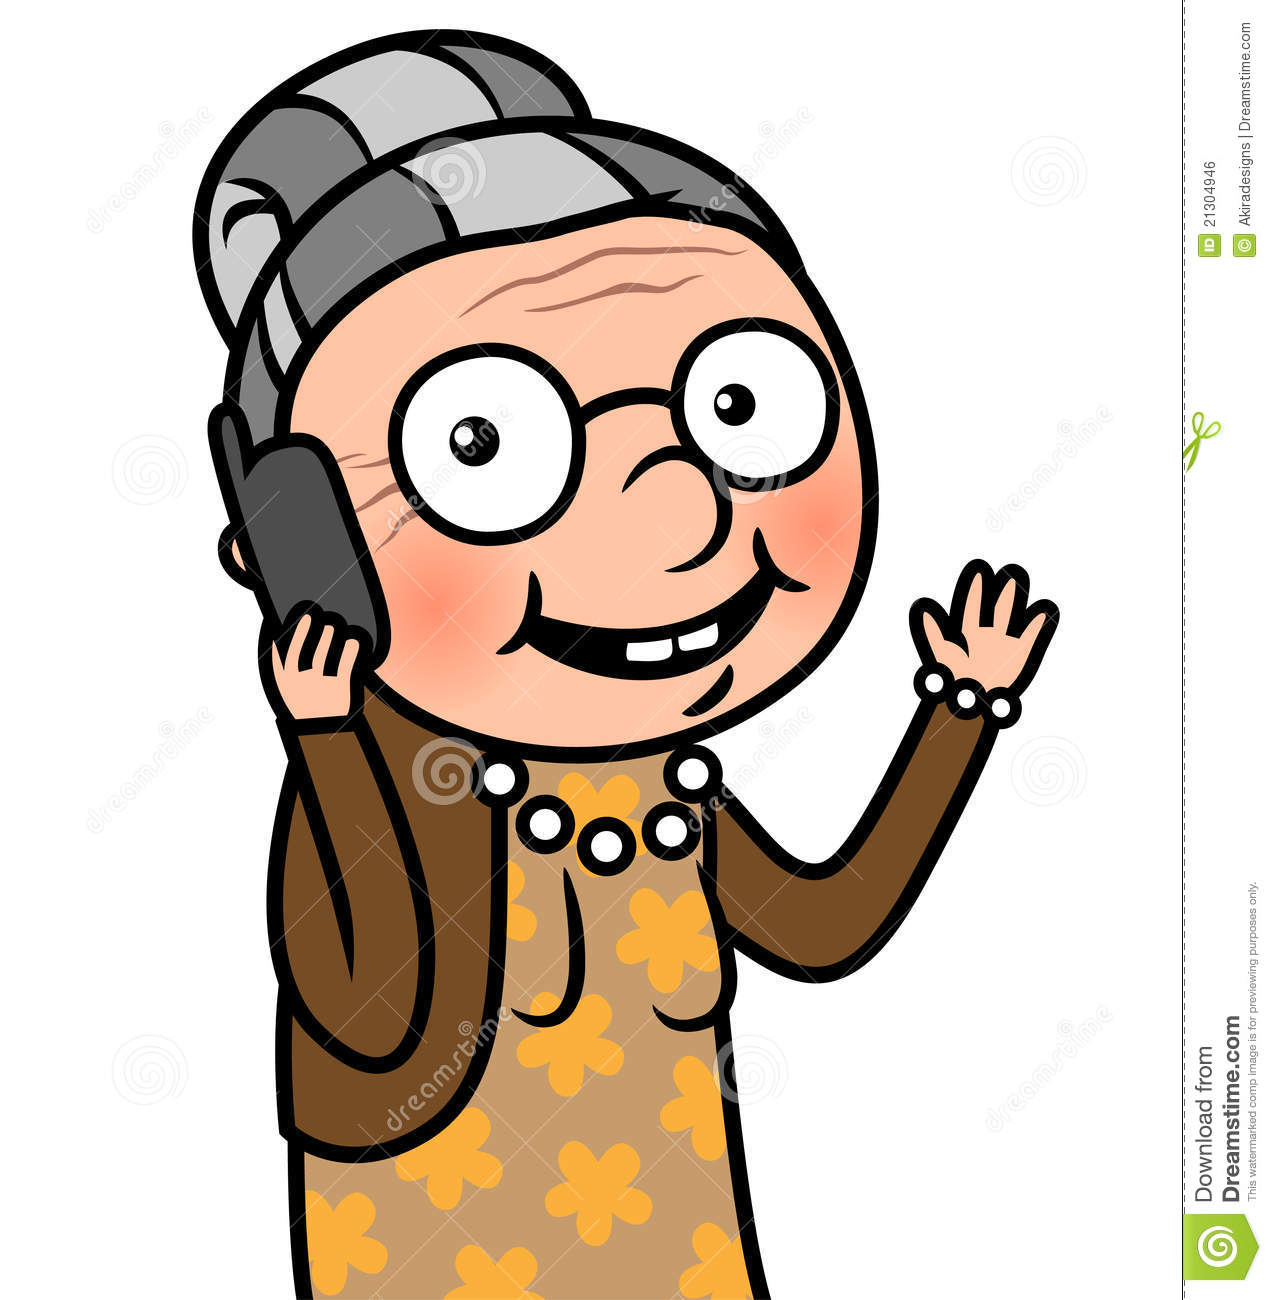 Old Woman Clip Art - Blogsbet - Old Lady Clip Art